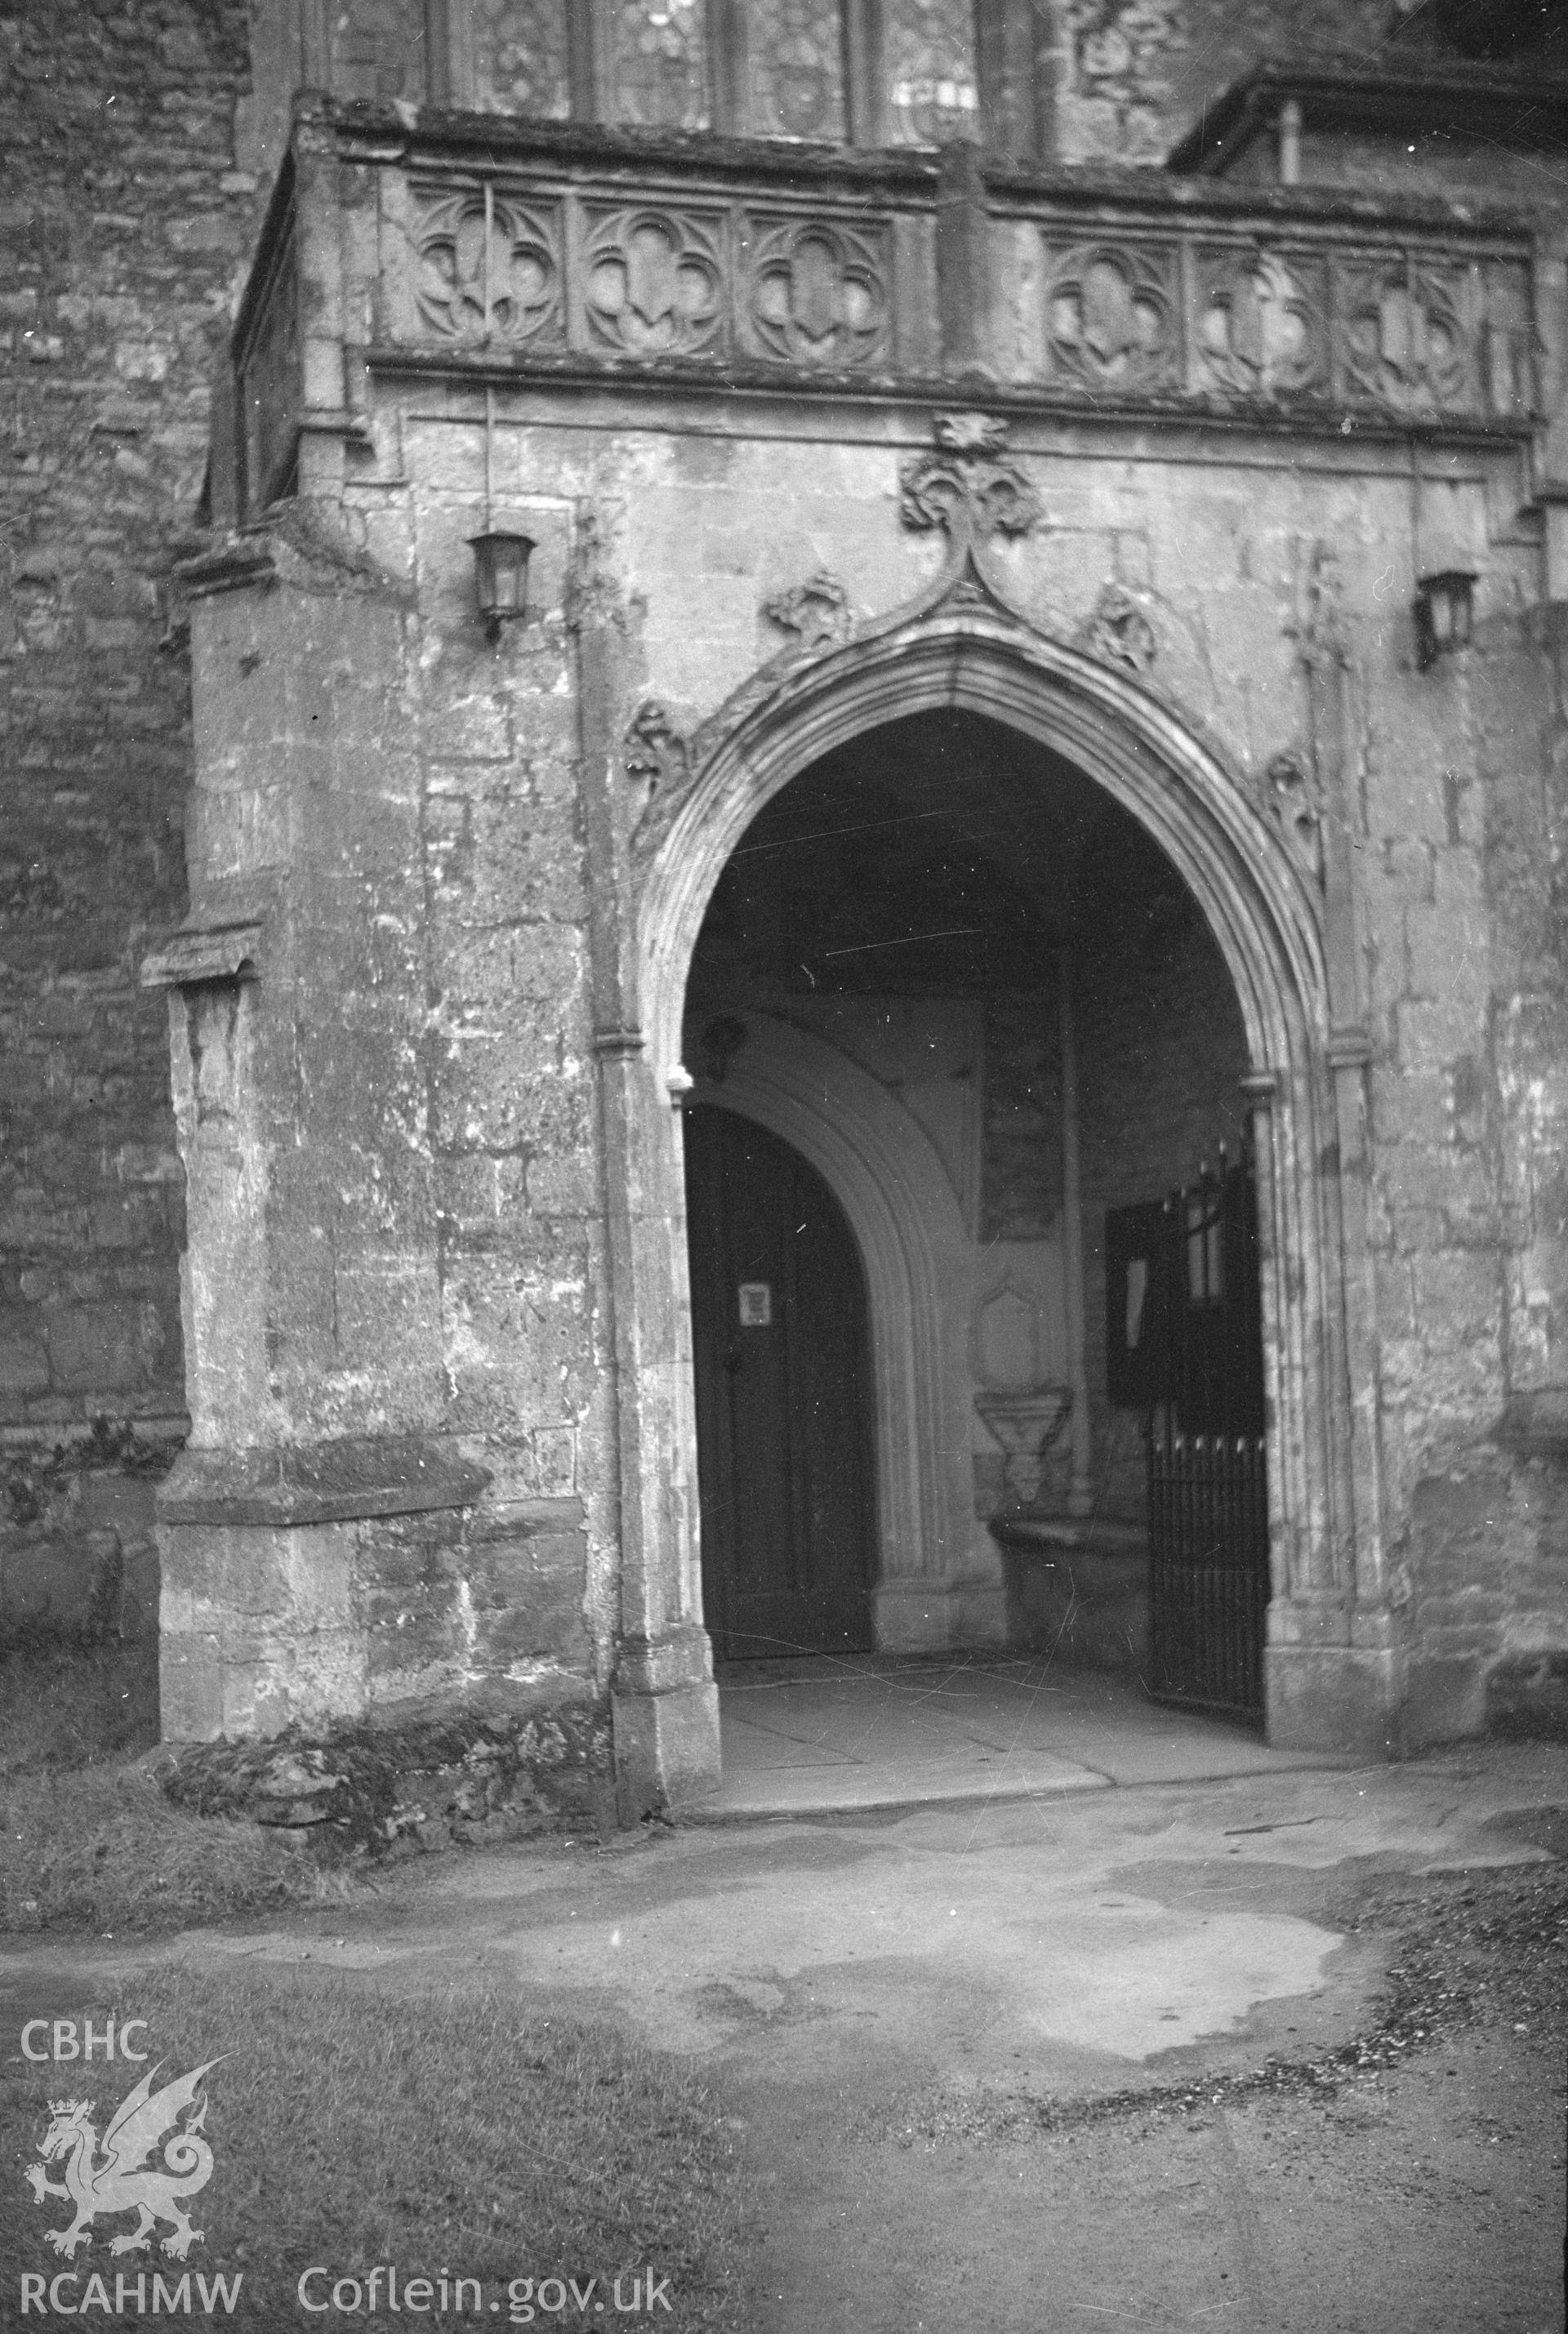 Digital copy of a nitrate negative showing the western porch of the north aisle at St Mary's Church, Usk, taken by Leonard Monroe.